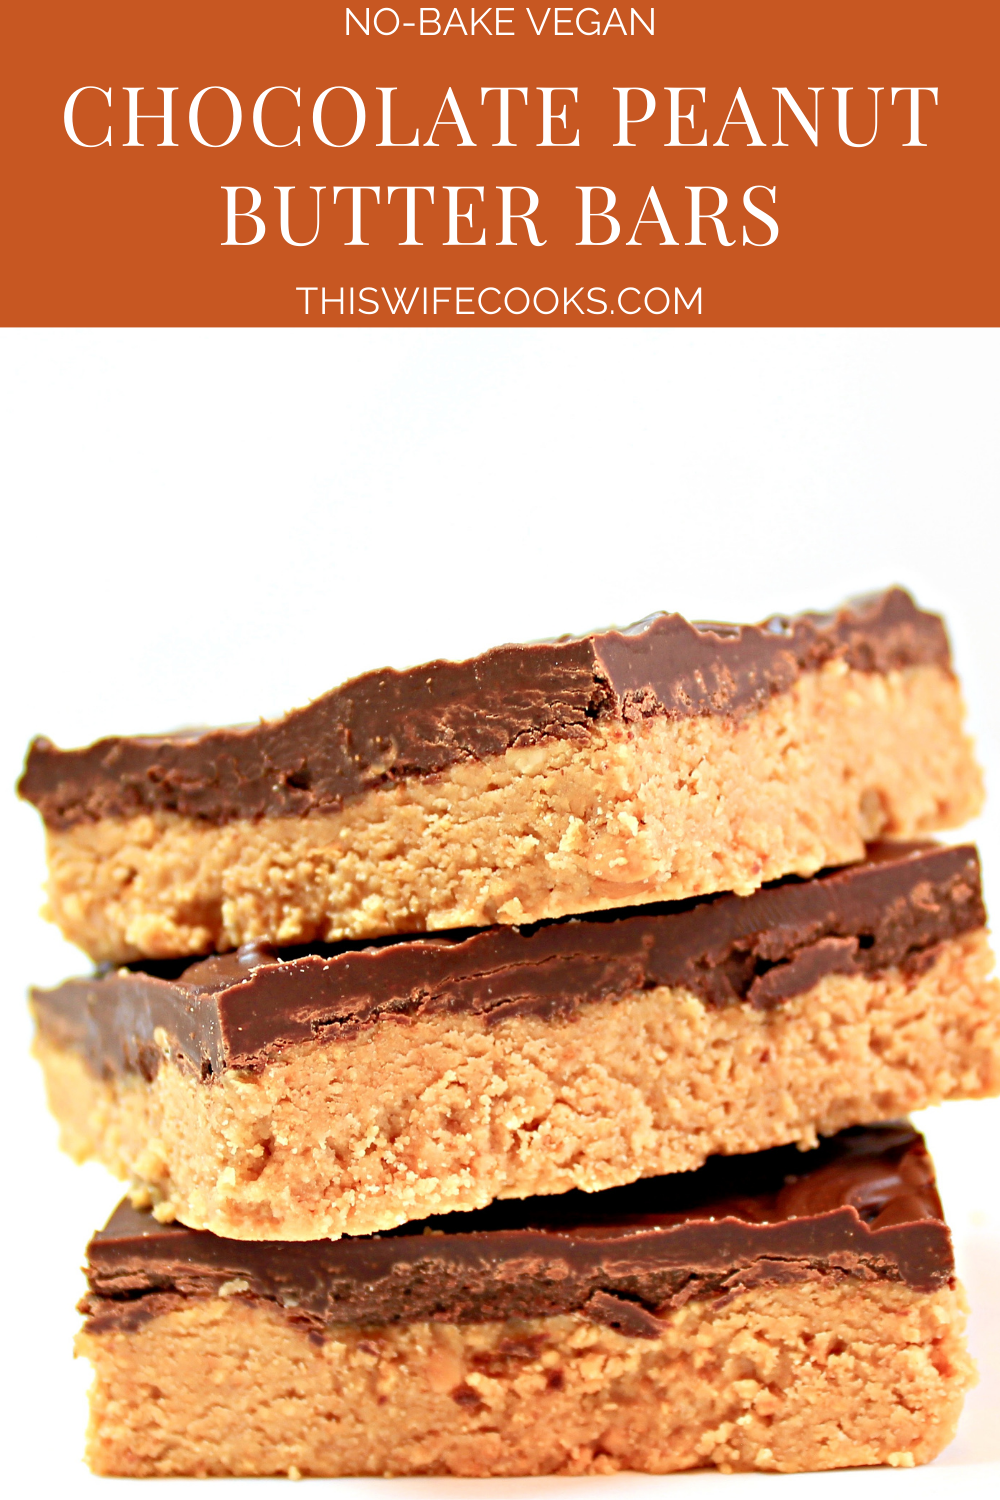 Chocolate Peanut Butter Bars ~ 5 ingredients! If you like Reese's peanut butter cups, you are going to love this easy, homemade, no-bake version of the classic candy!  via @thiswifecooks